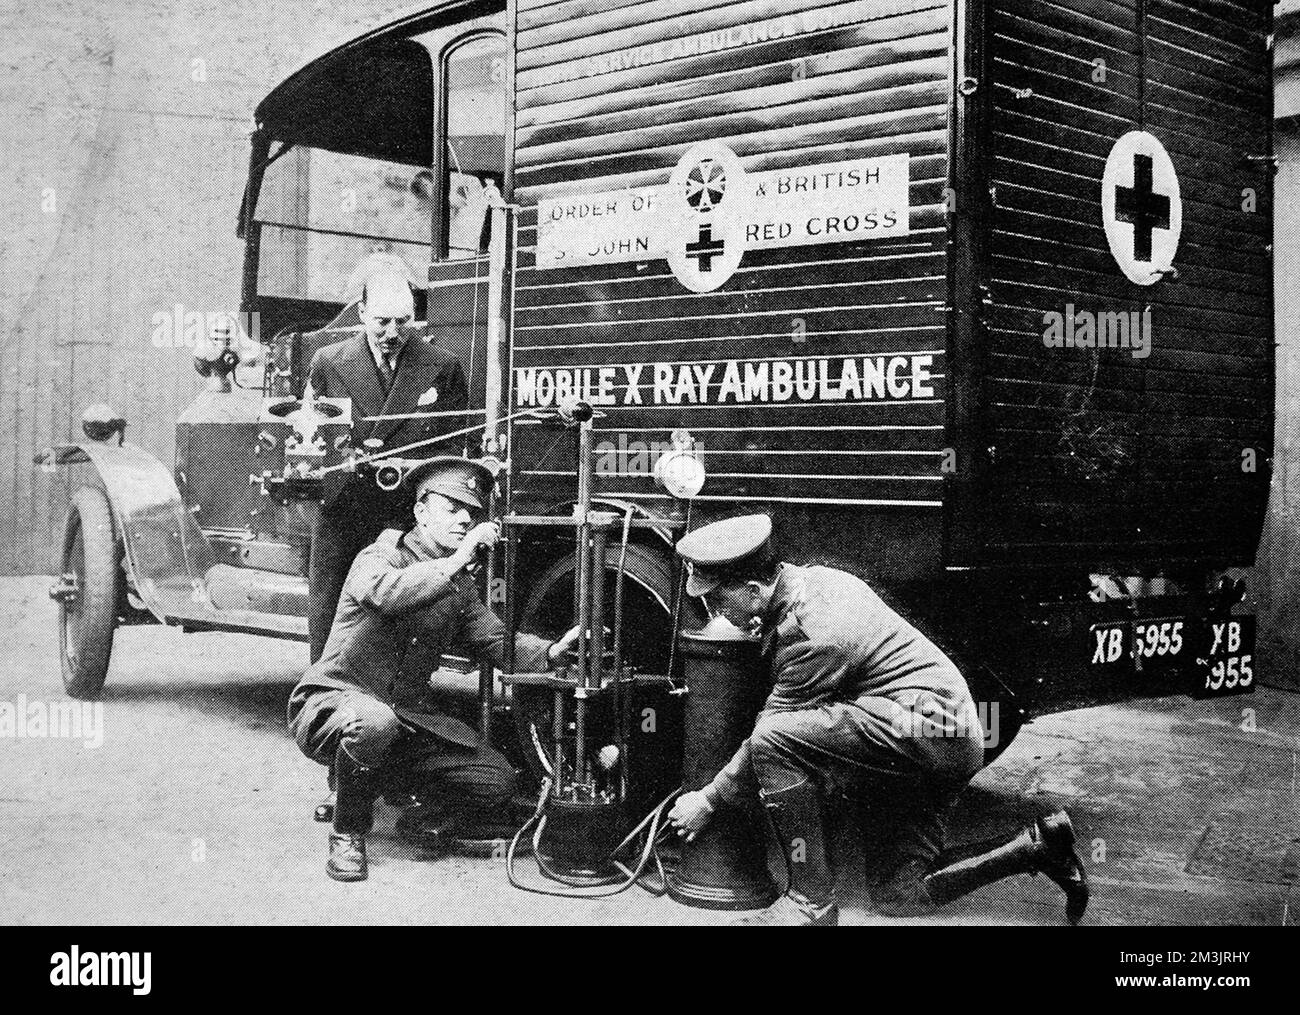 The mobile x-ray ambulance used for the second radiological examination of King George carried out Dr H Graham Hogson. The x-ray unit was equipped with a darkroom. Stock Photo